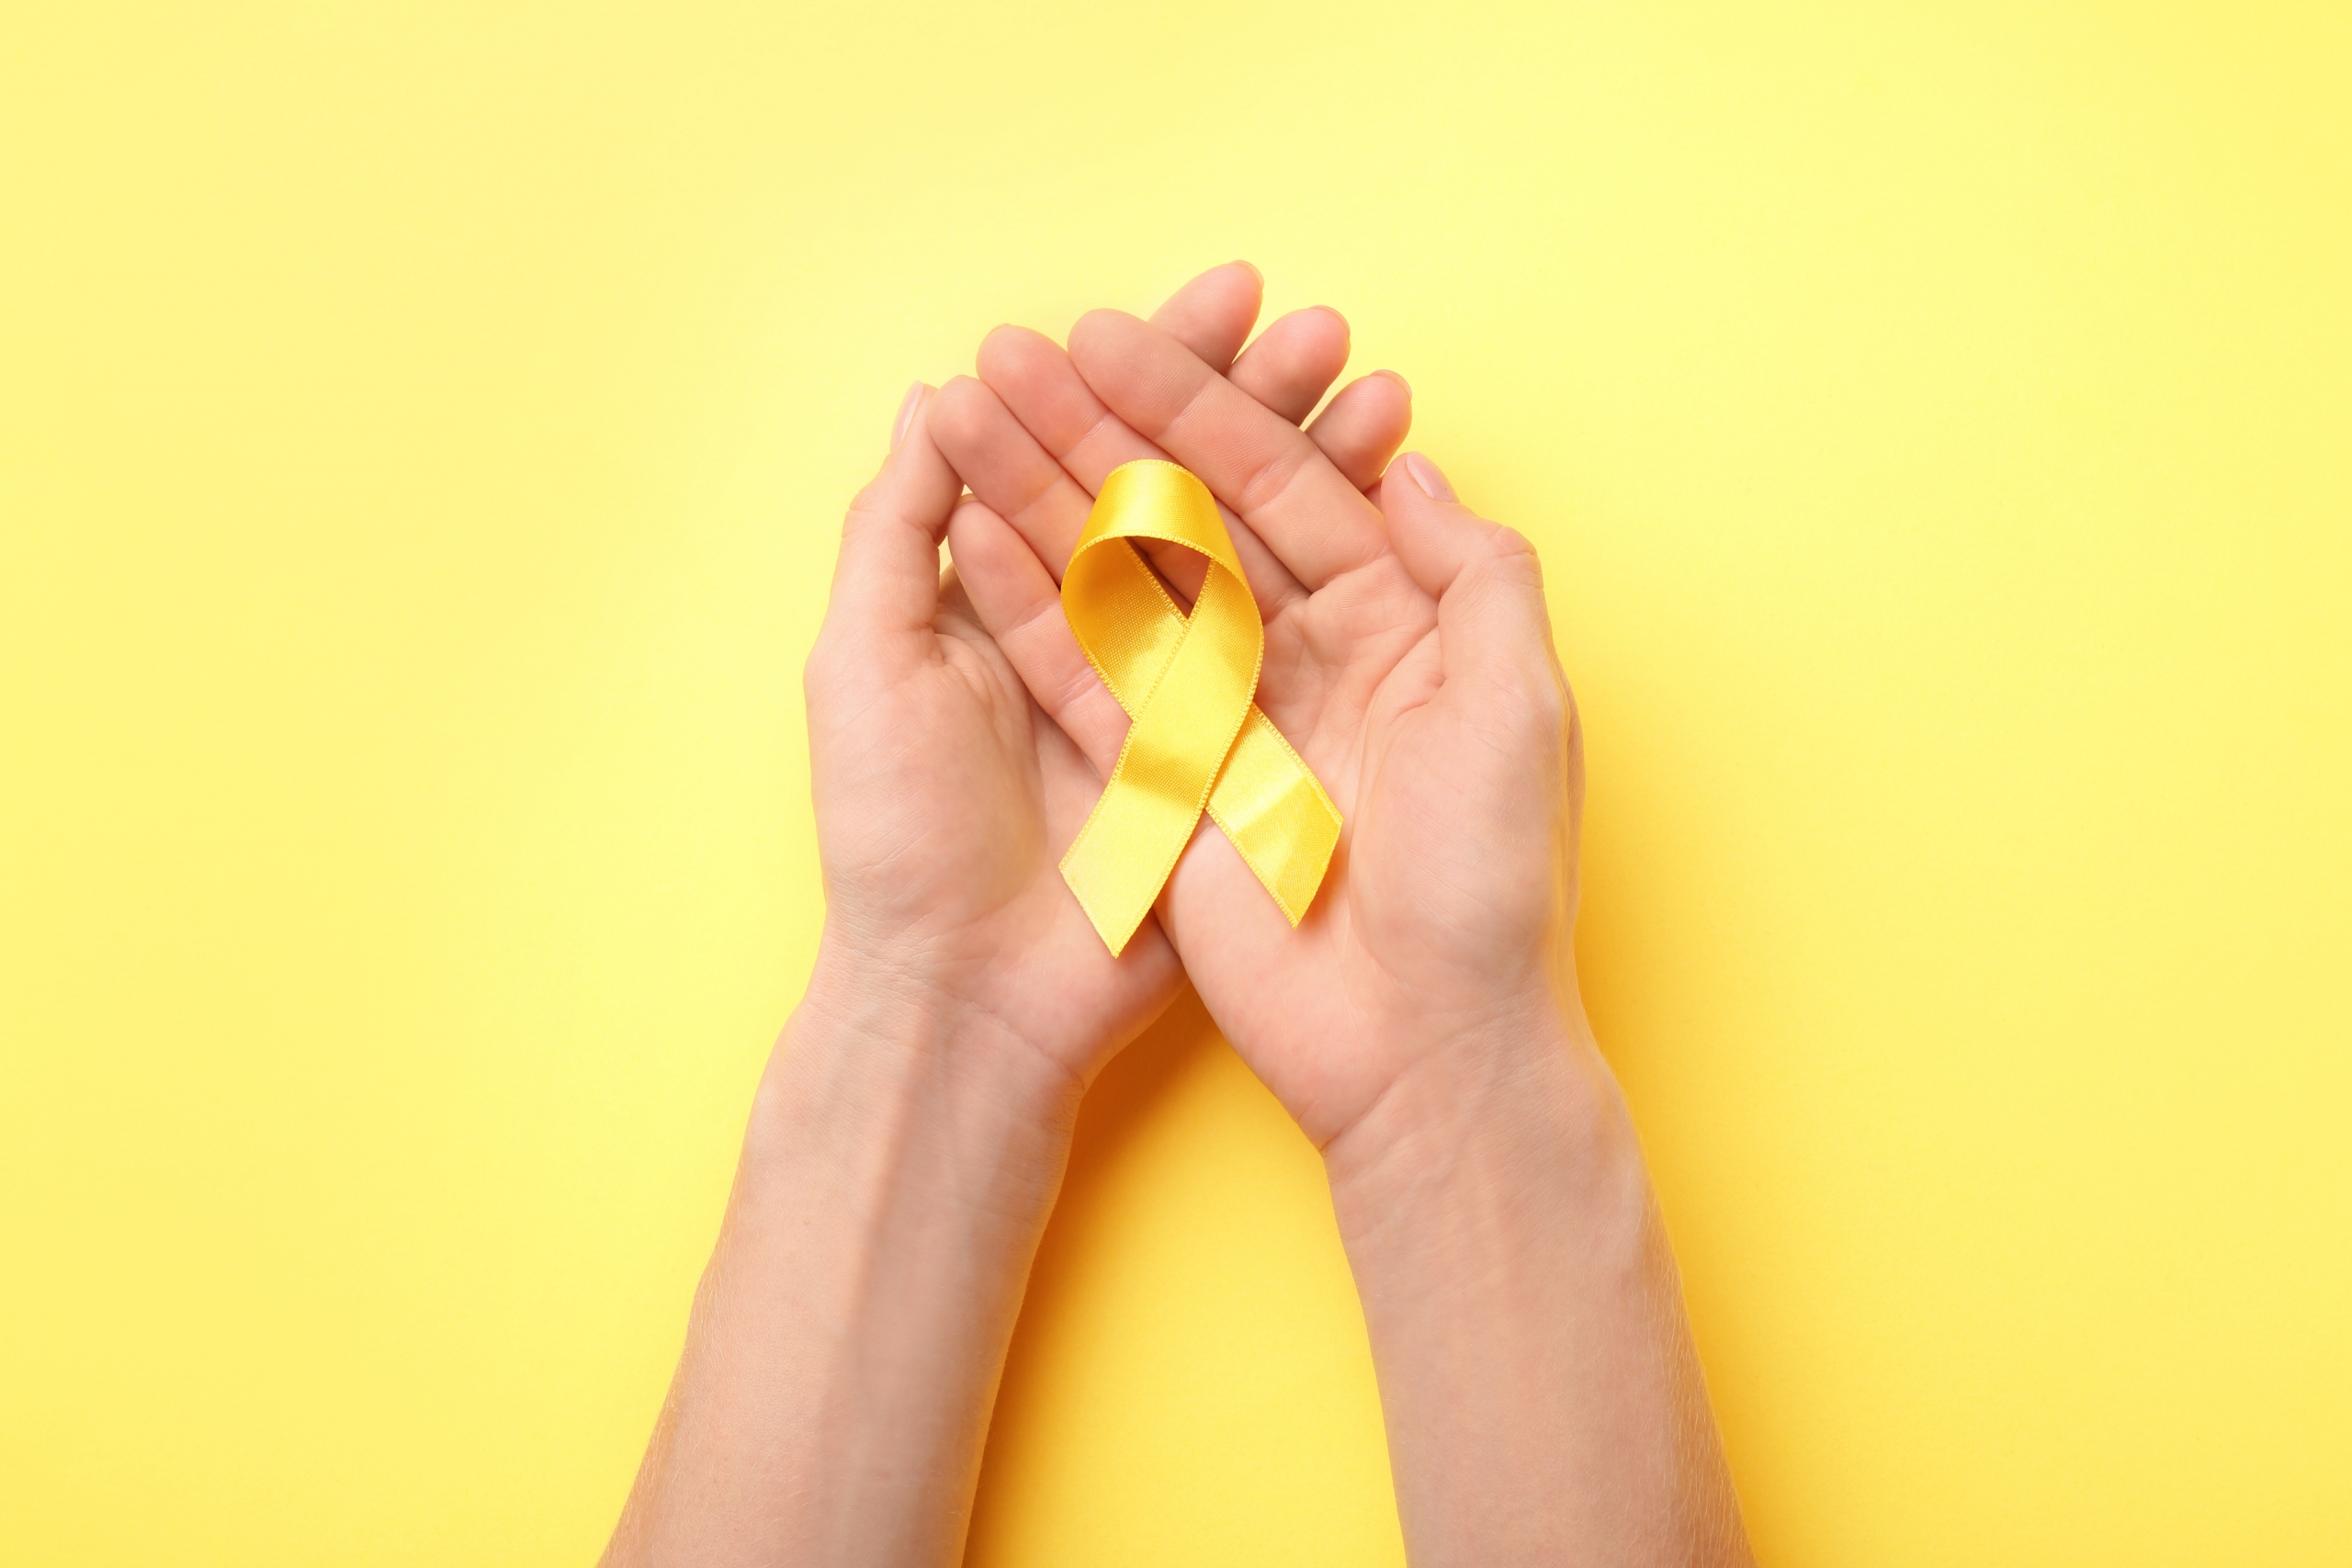 Female,Hands,Holding,Yellow,Ribbon,On,Color,Background.,Cancer,Concept